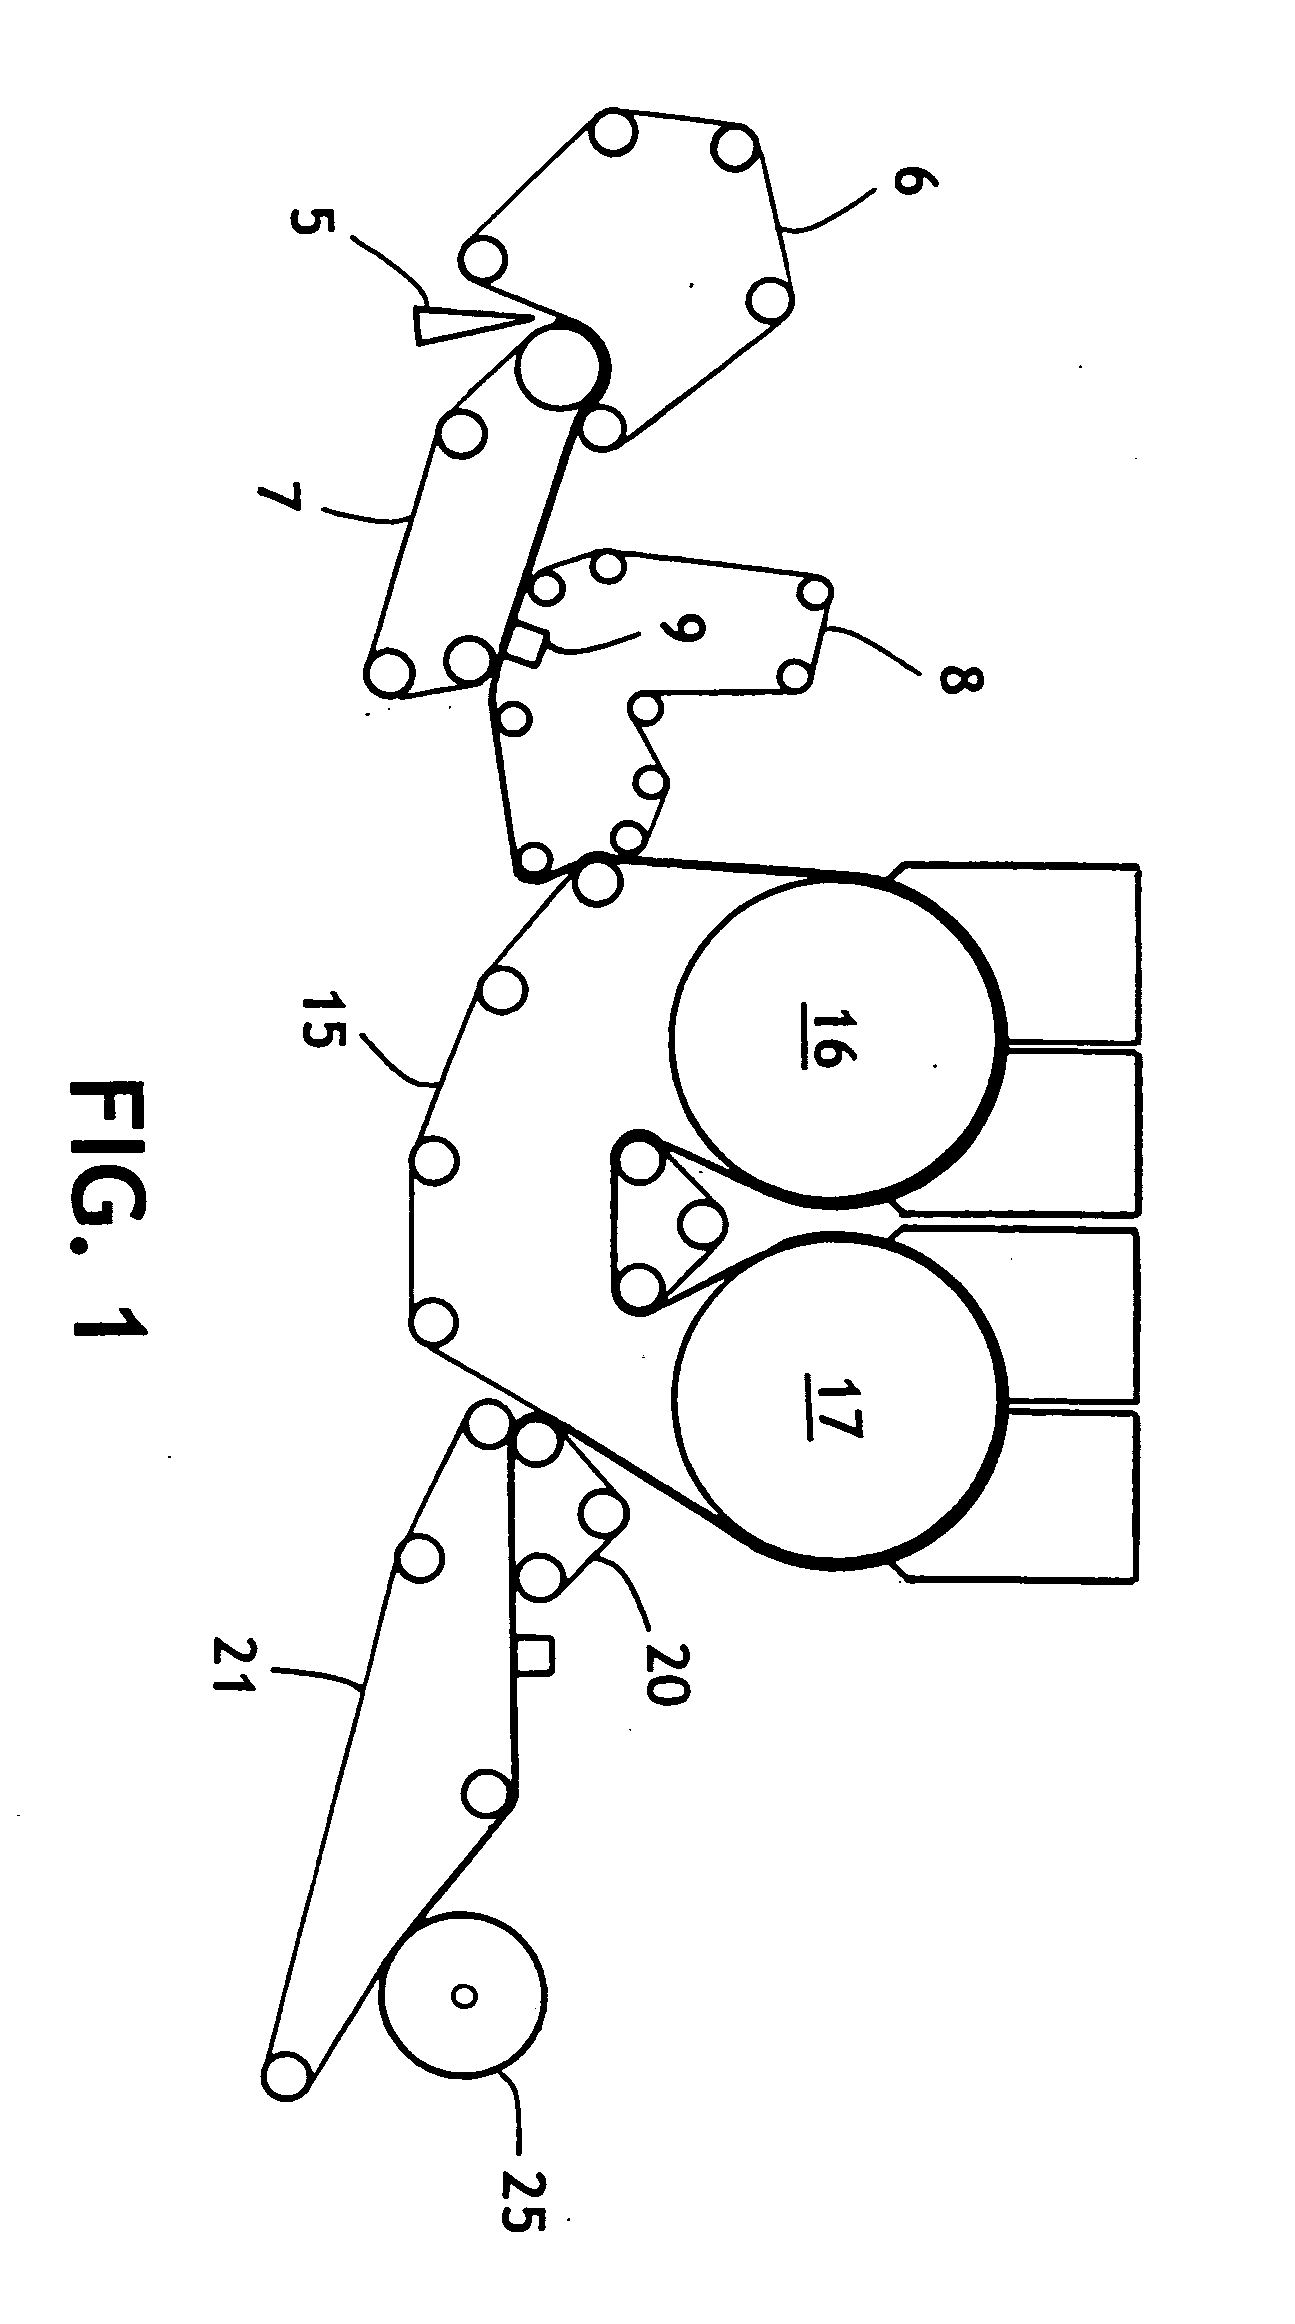 Tissue products having substantially equal machine direction and cross-machine direction mechanical properties